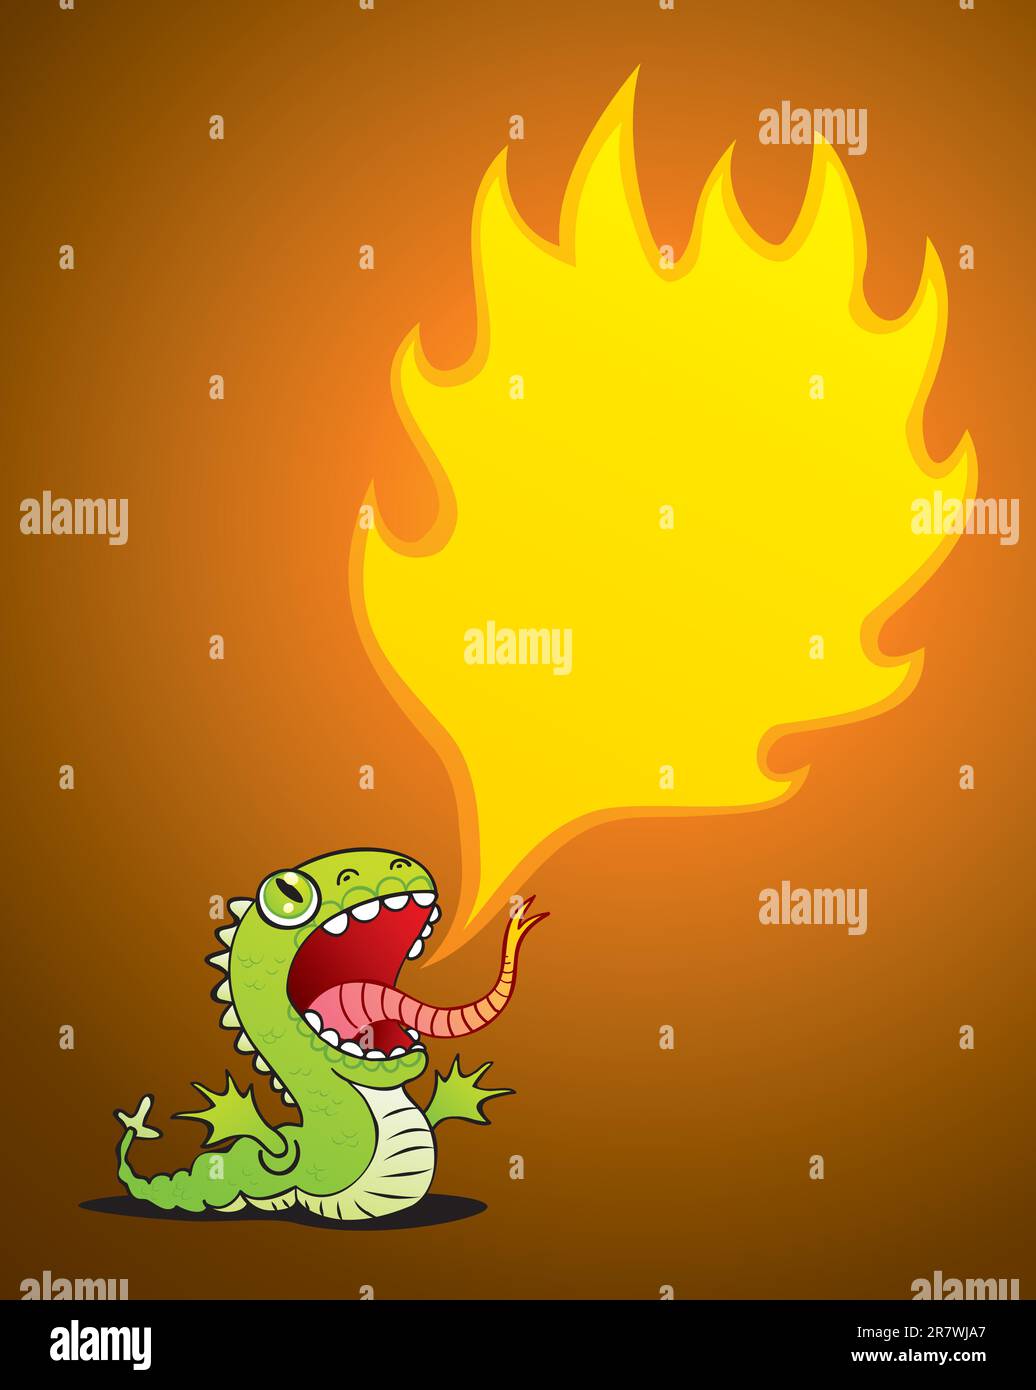 Illustration of a small dragon spewing flames Stock Vector